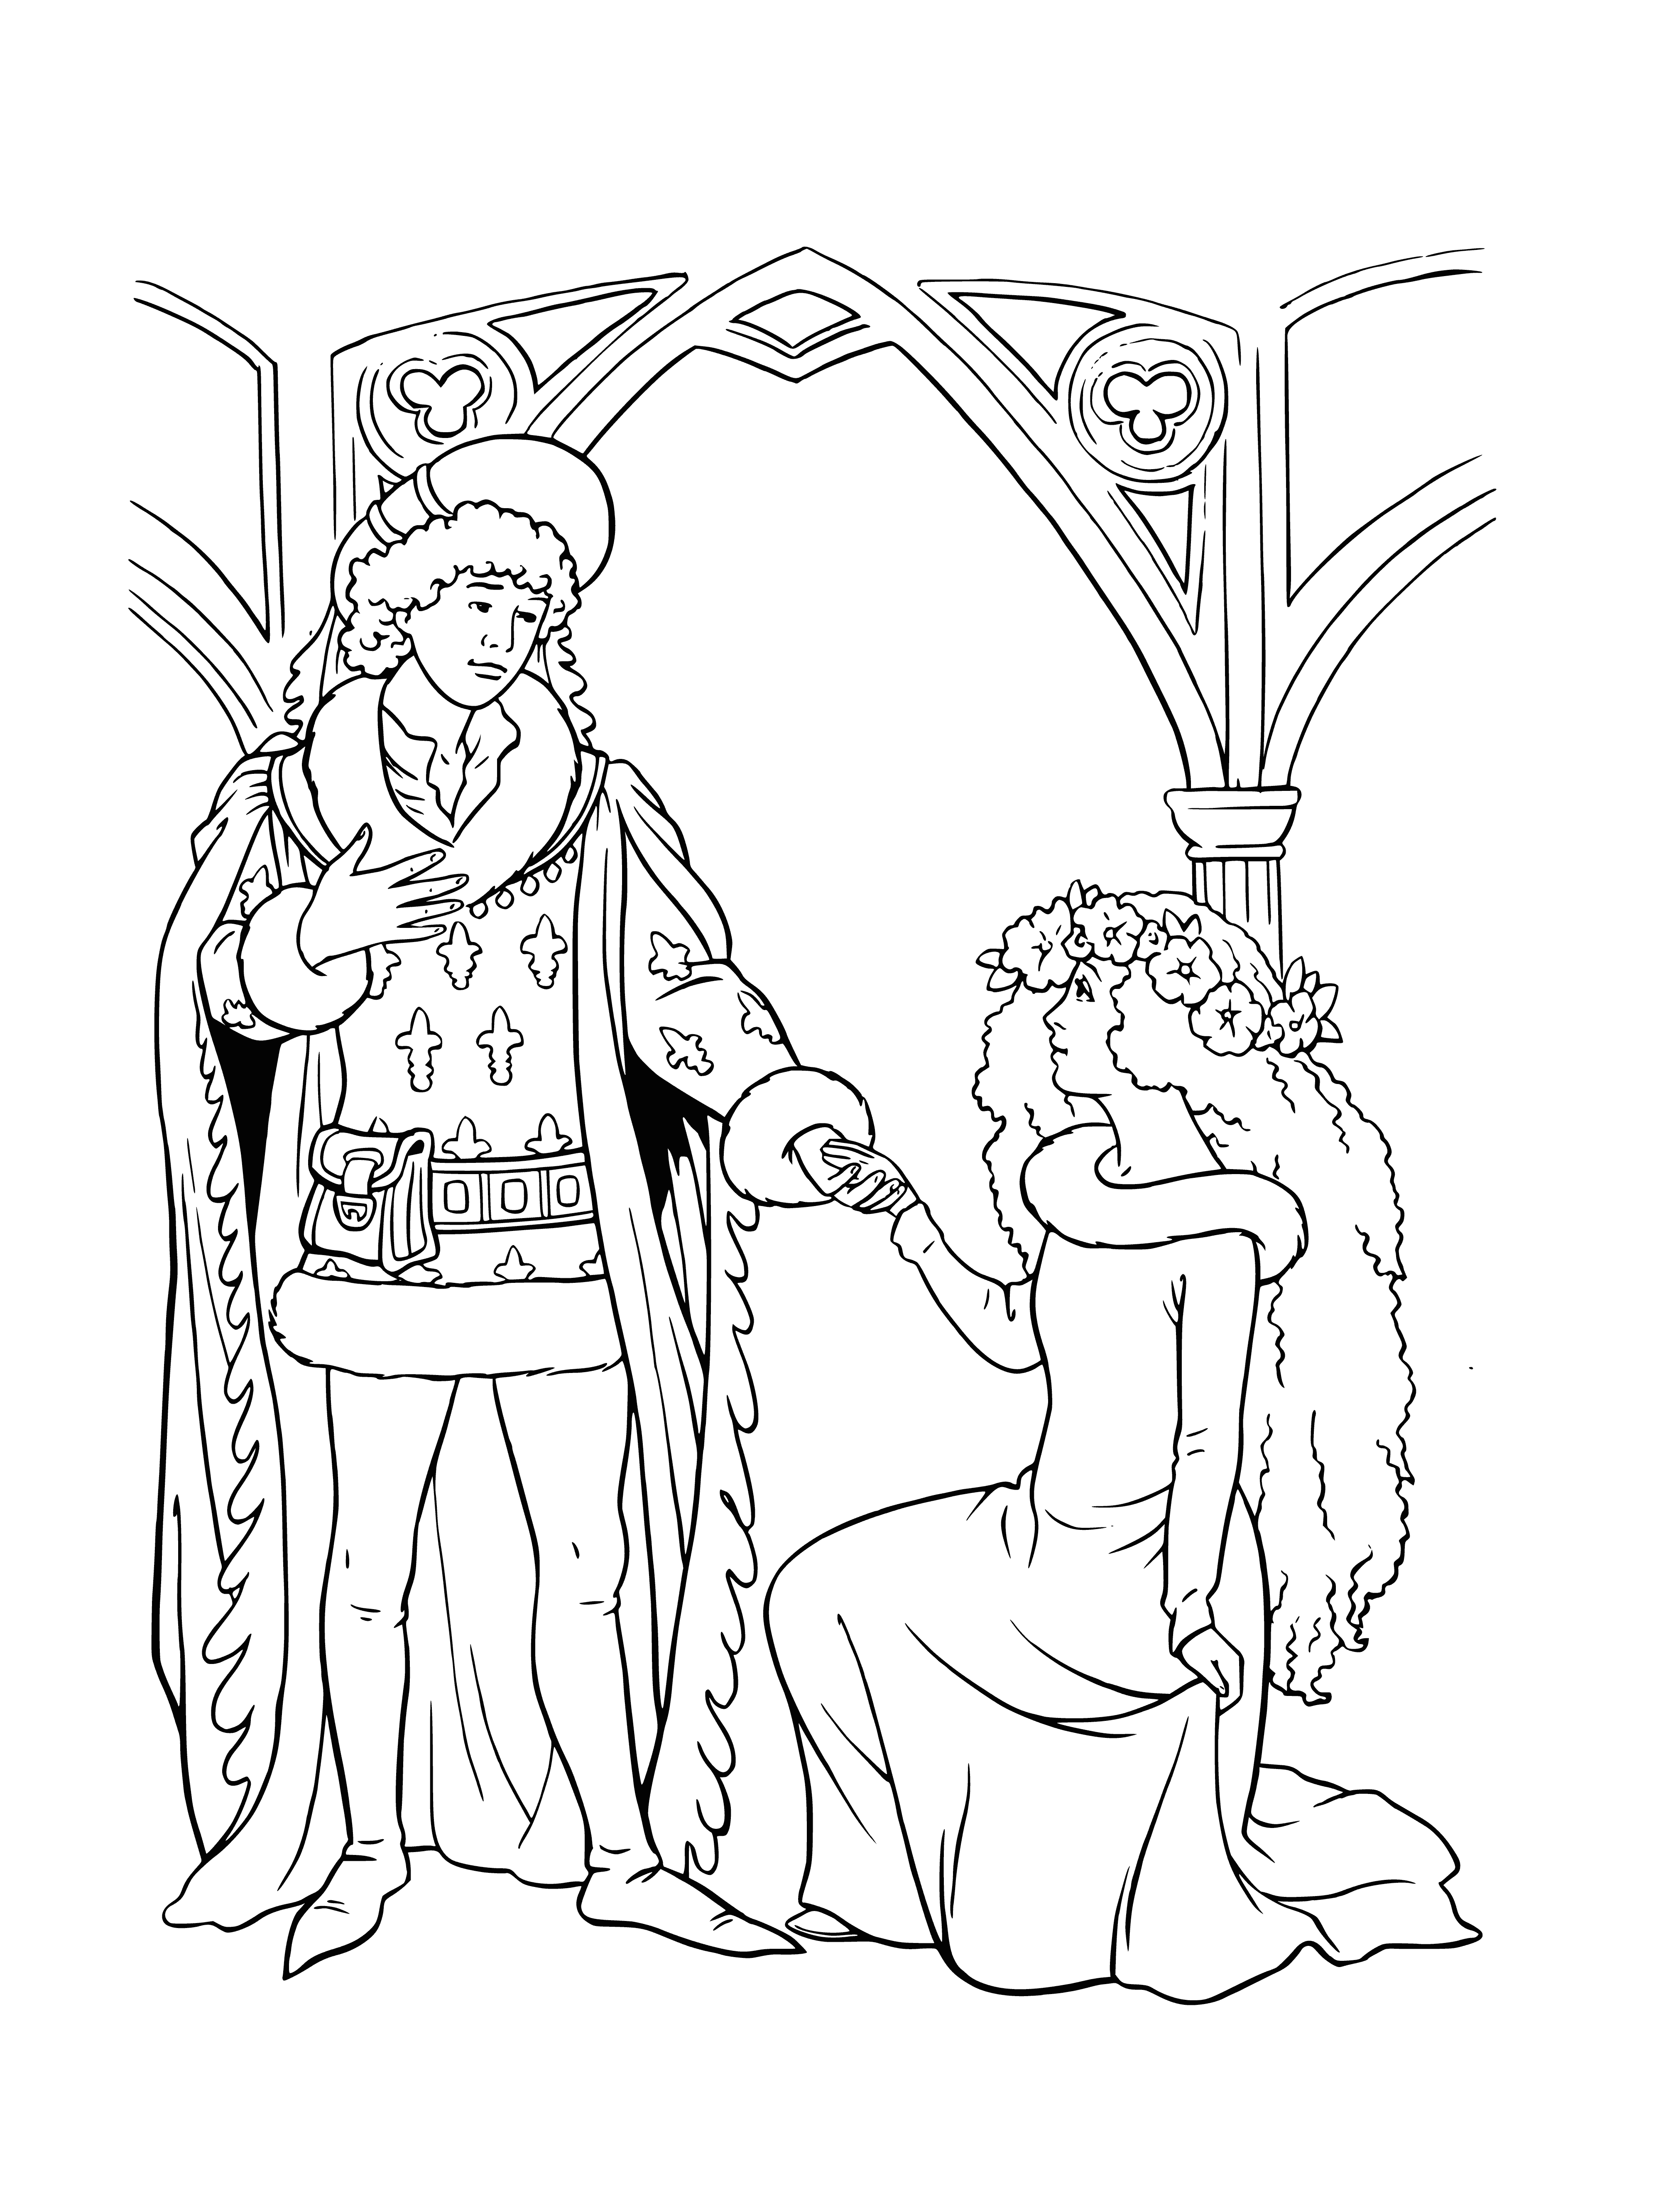 coloring page: --> Prince & princess in coloring page stand/sit w/ swords/flowers; both wear crowns.